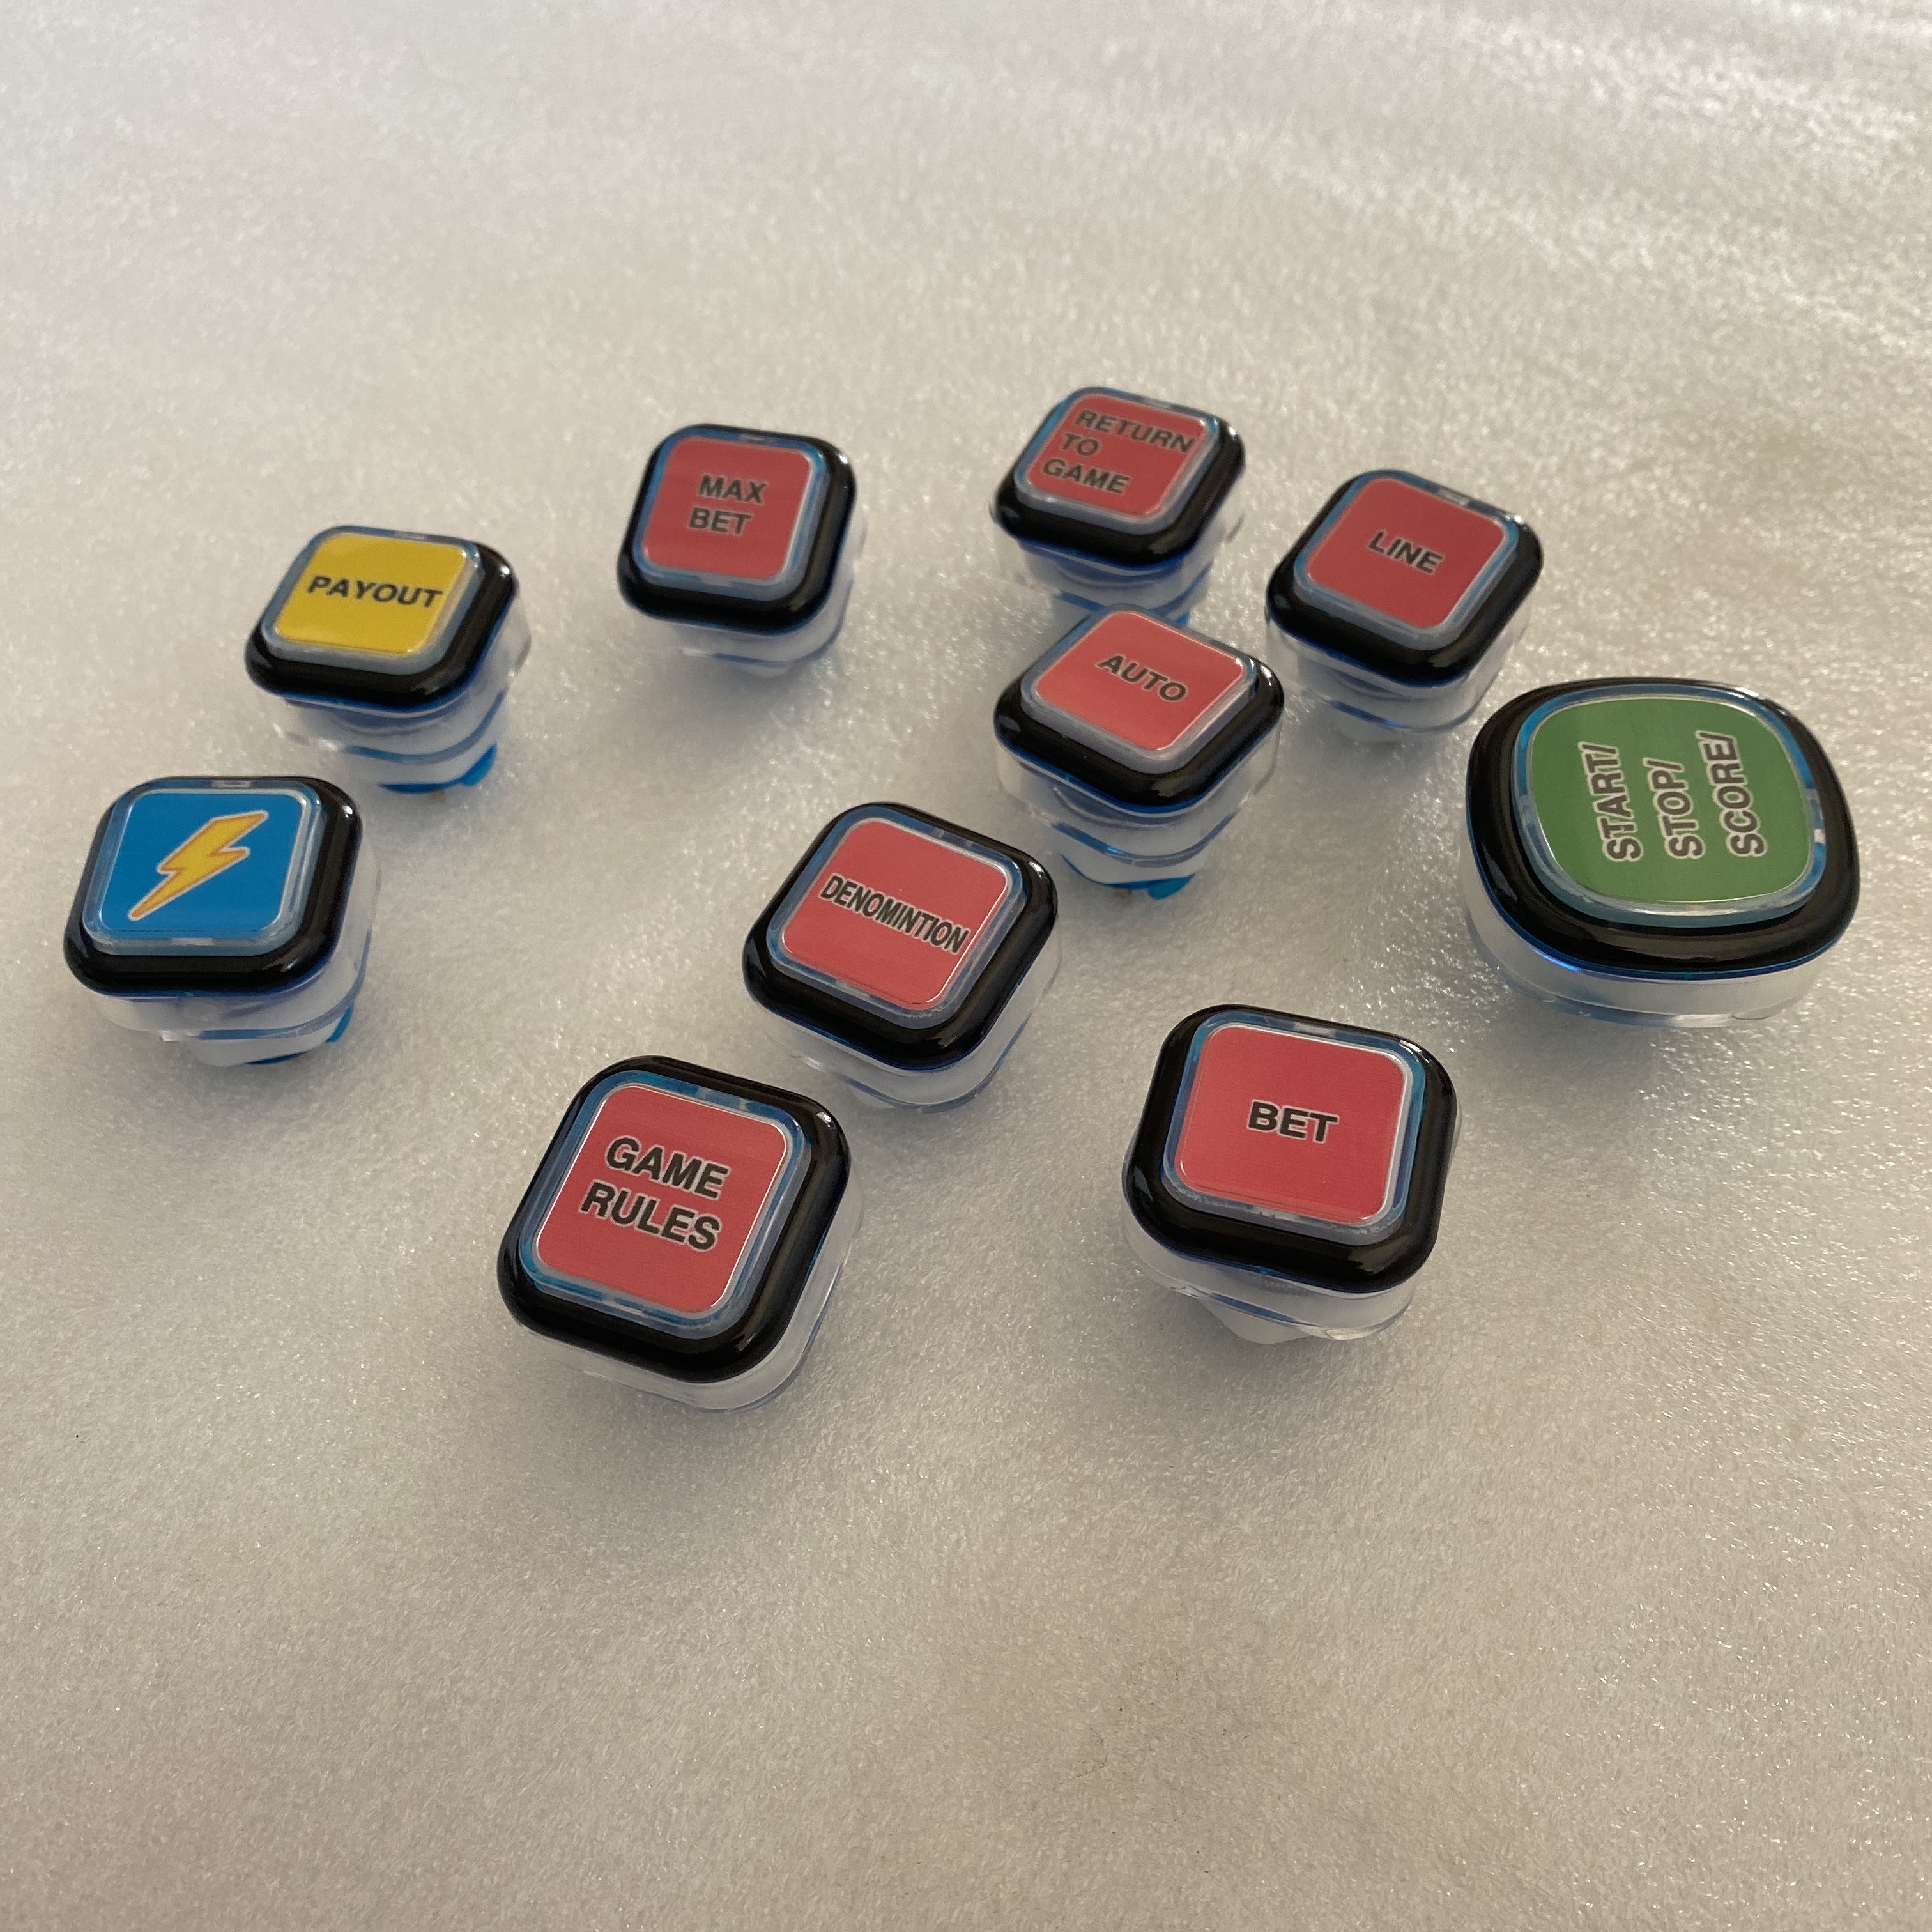 Rosh Play Start Buttons For Video Slot Games Machines for sale